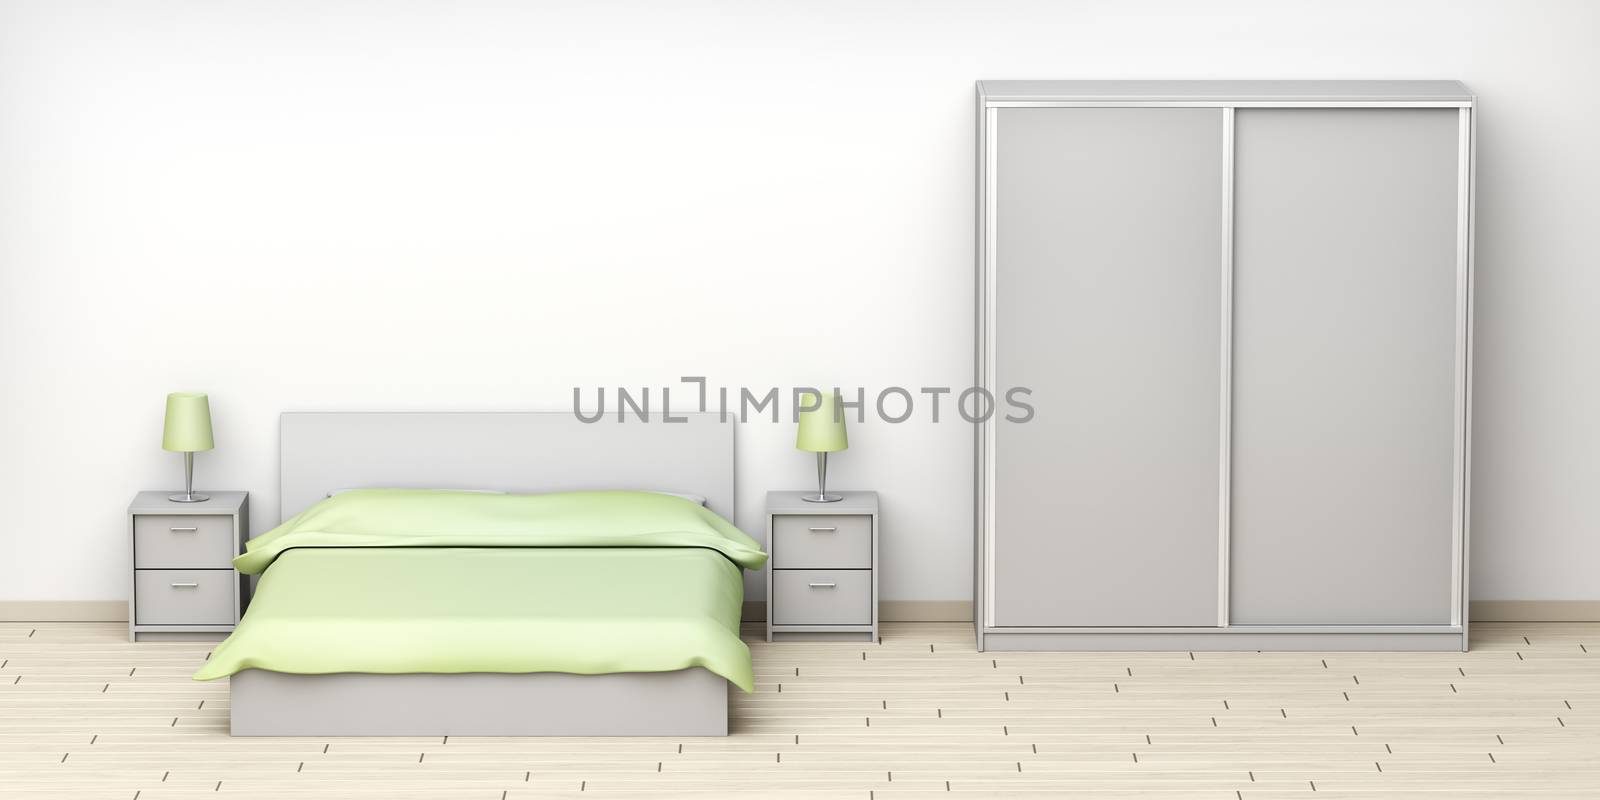 Modern hotel room with gray colored furniture